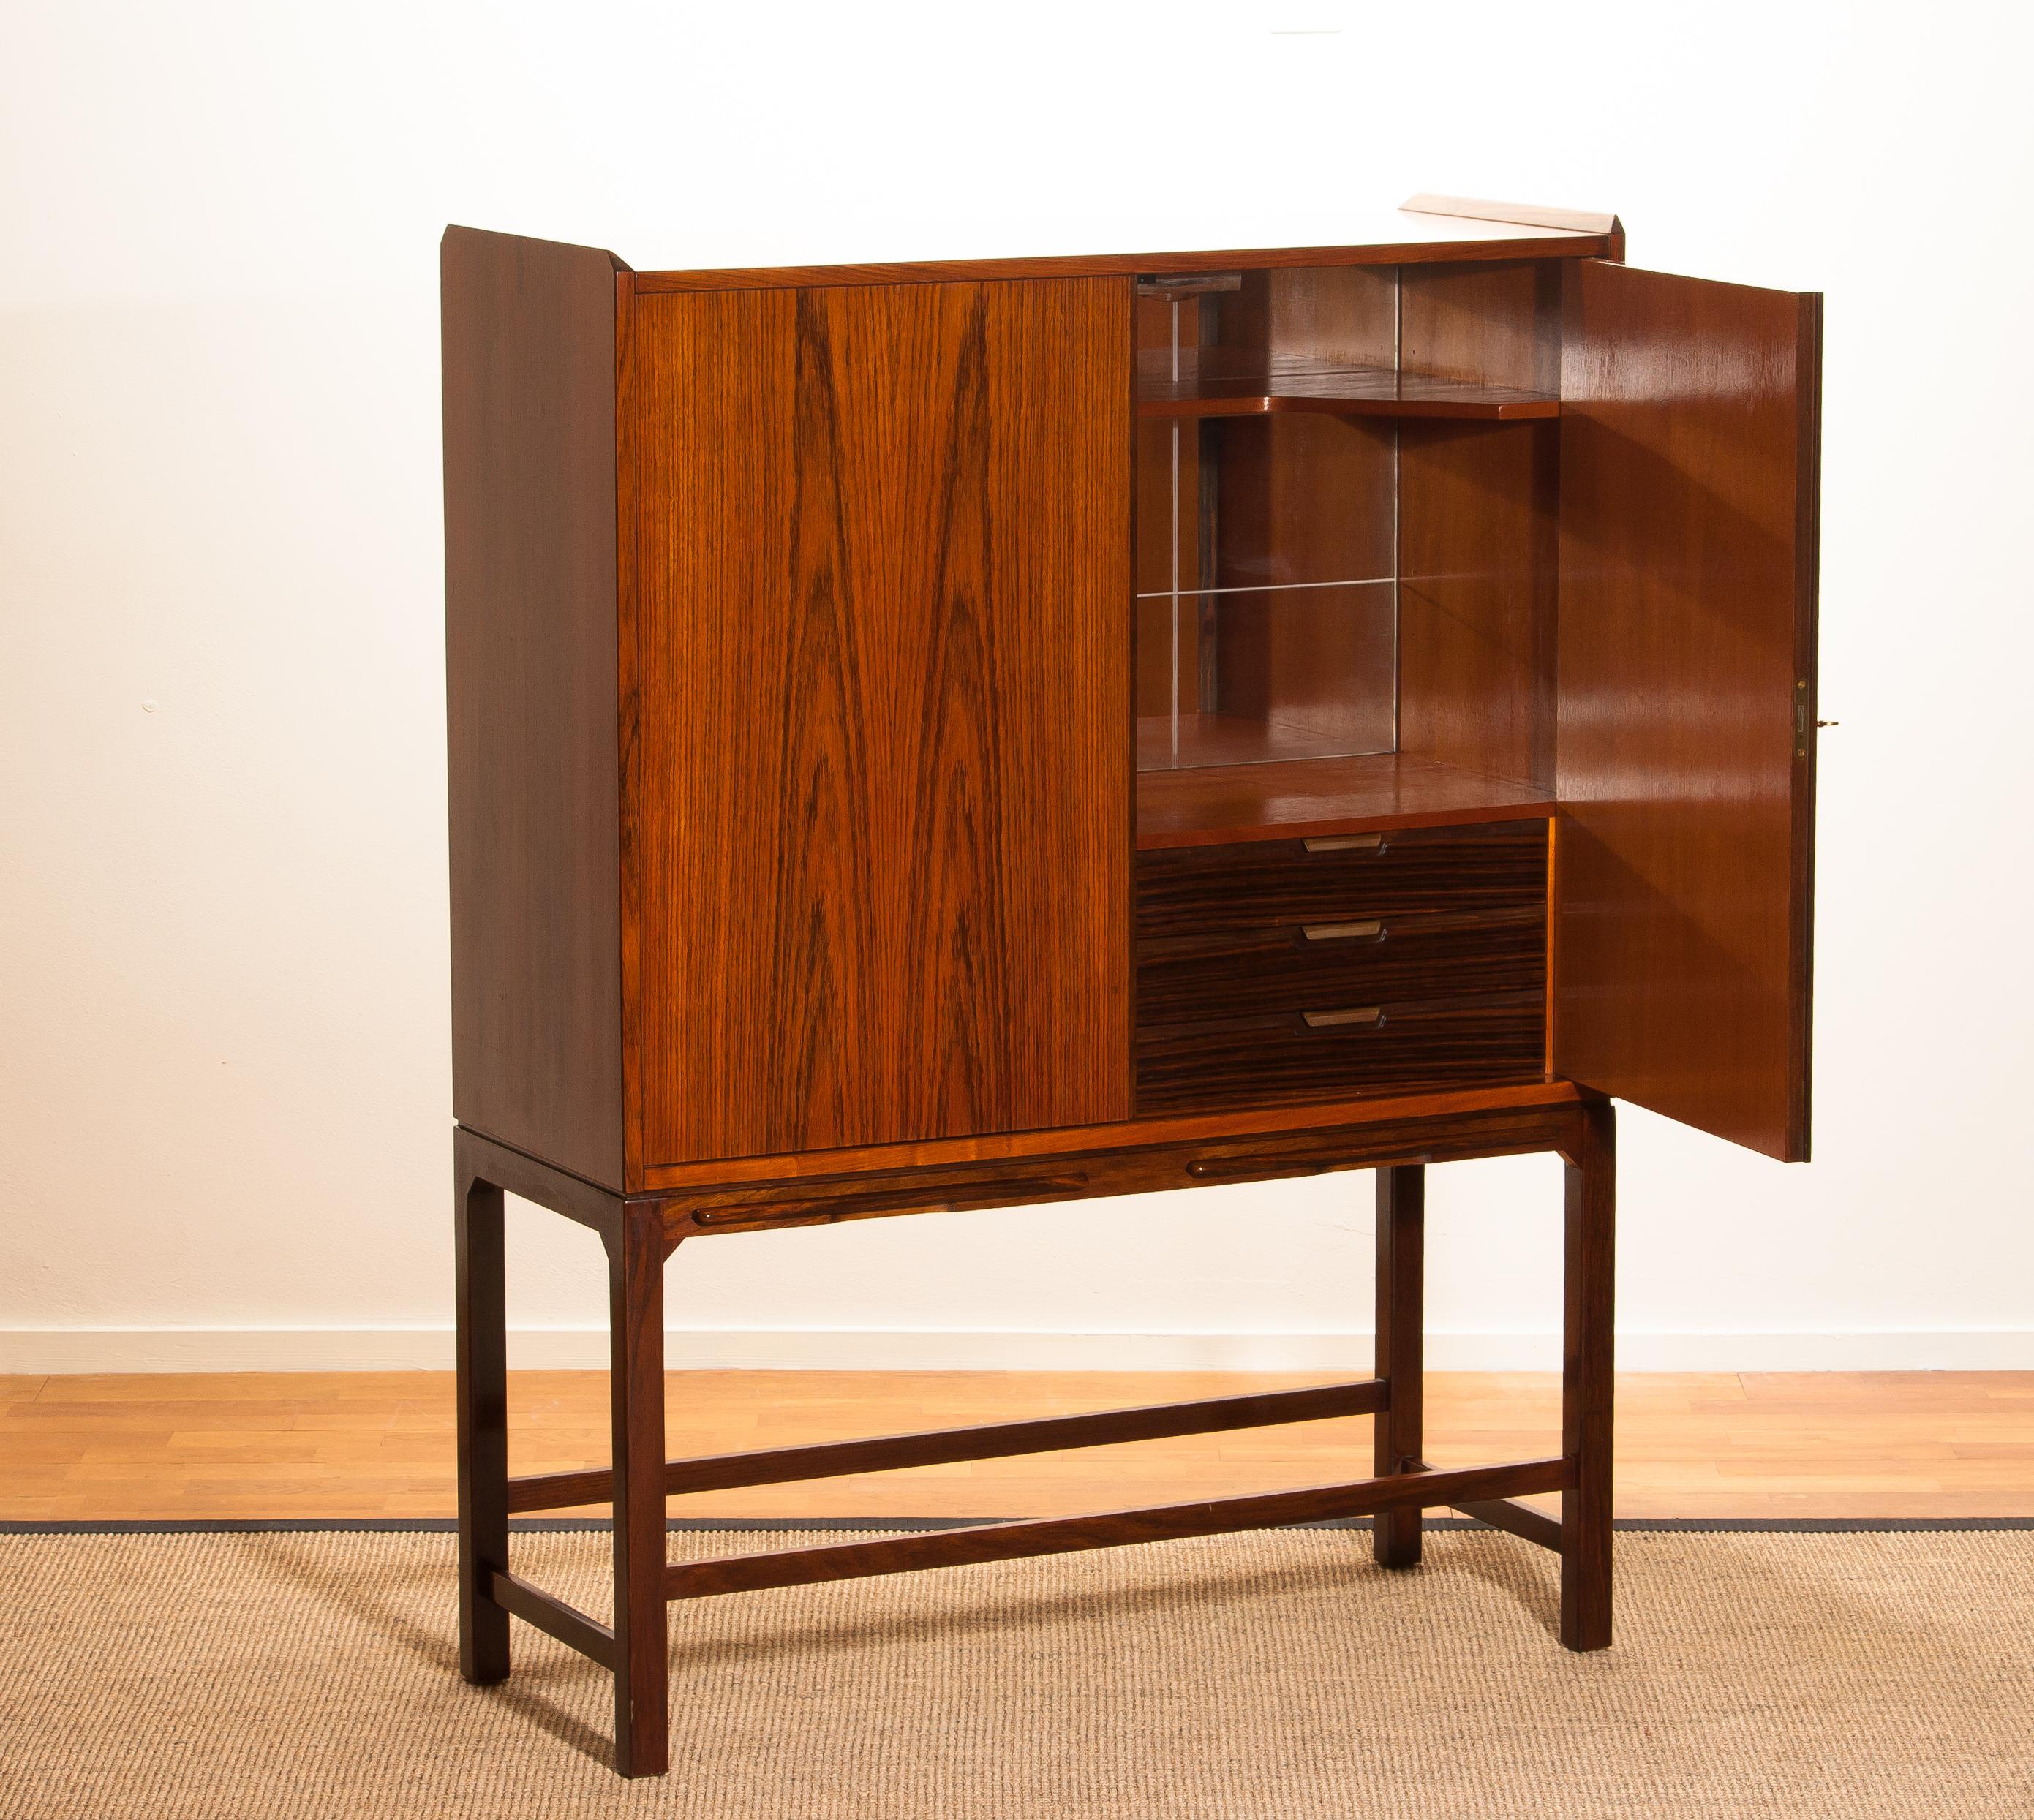 Exceptional beautiful and in perfect condition dry bar/cocktail cabinet of mahogany on a skinny walnut stand. In the walnut, stand are two extendable shelves.
Inside the cabinet is made of teak. The three drawers are in walnut. The drawers are